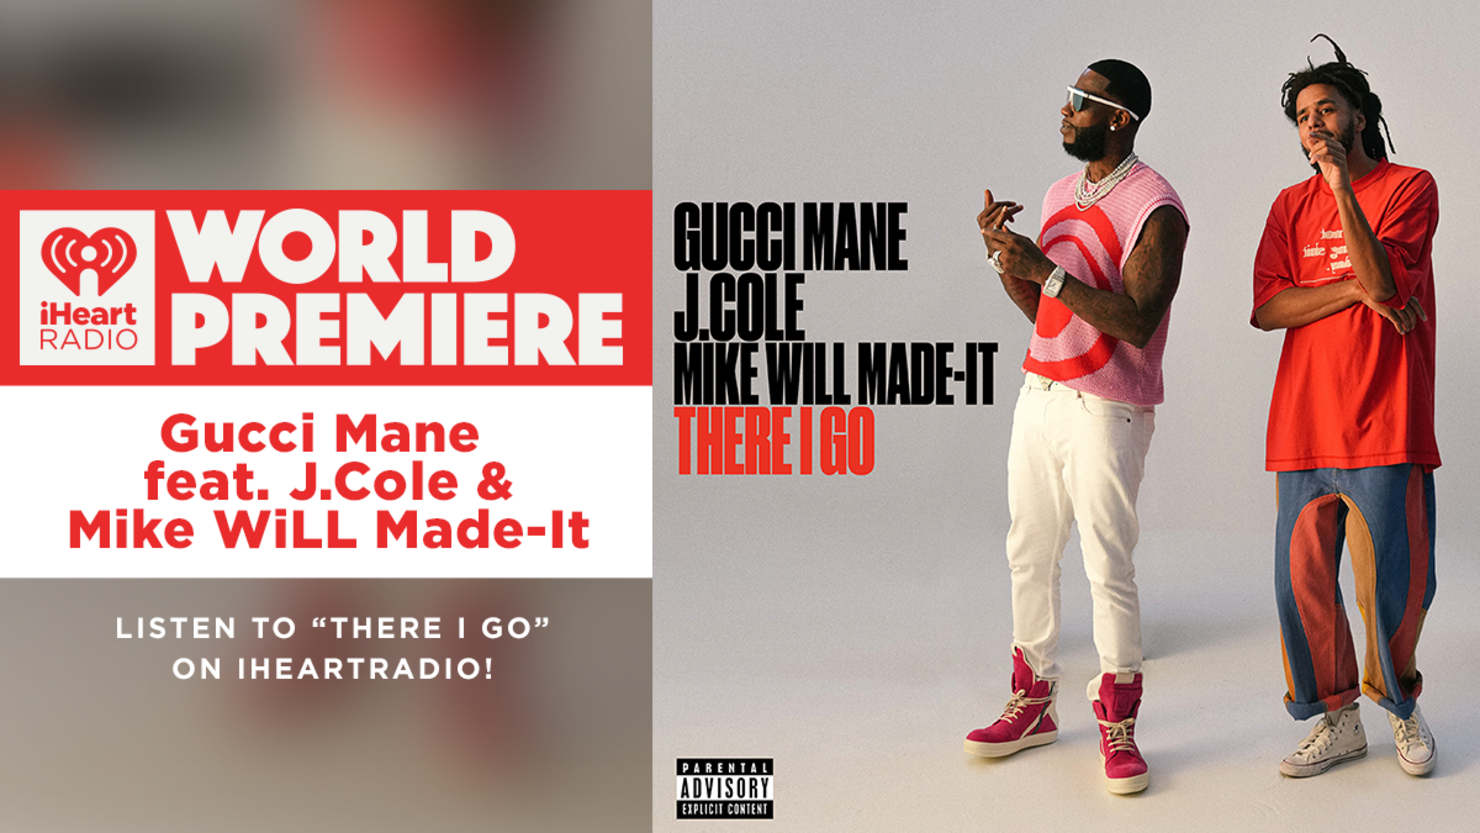 Gucci Mane, J. Cole & Mike WiLL Made-It